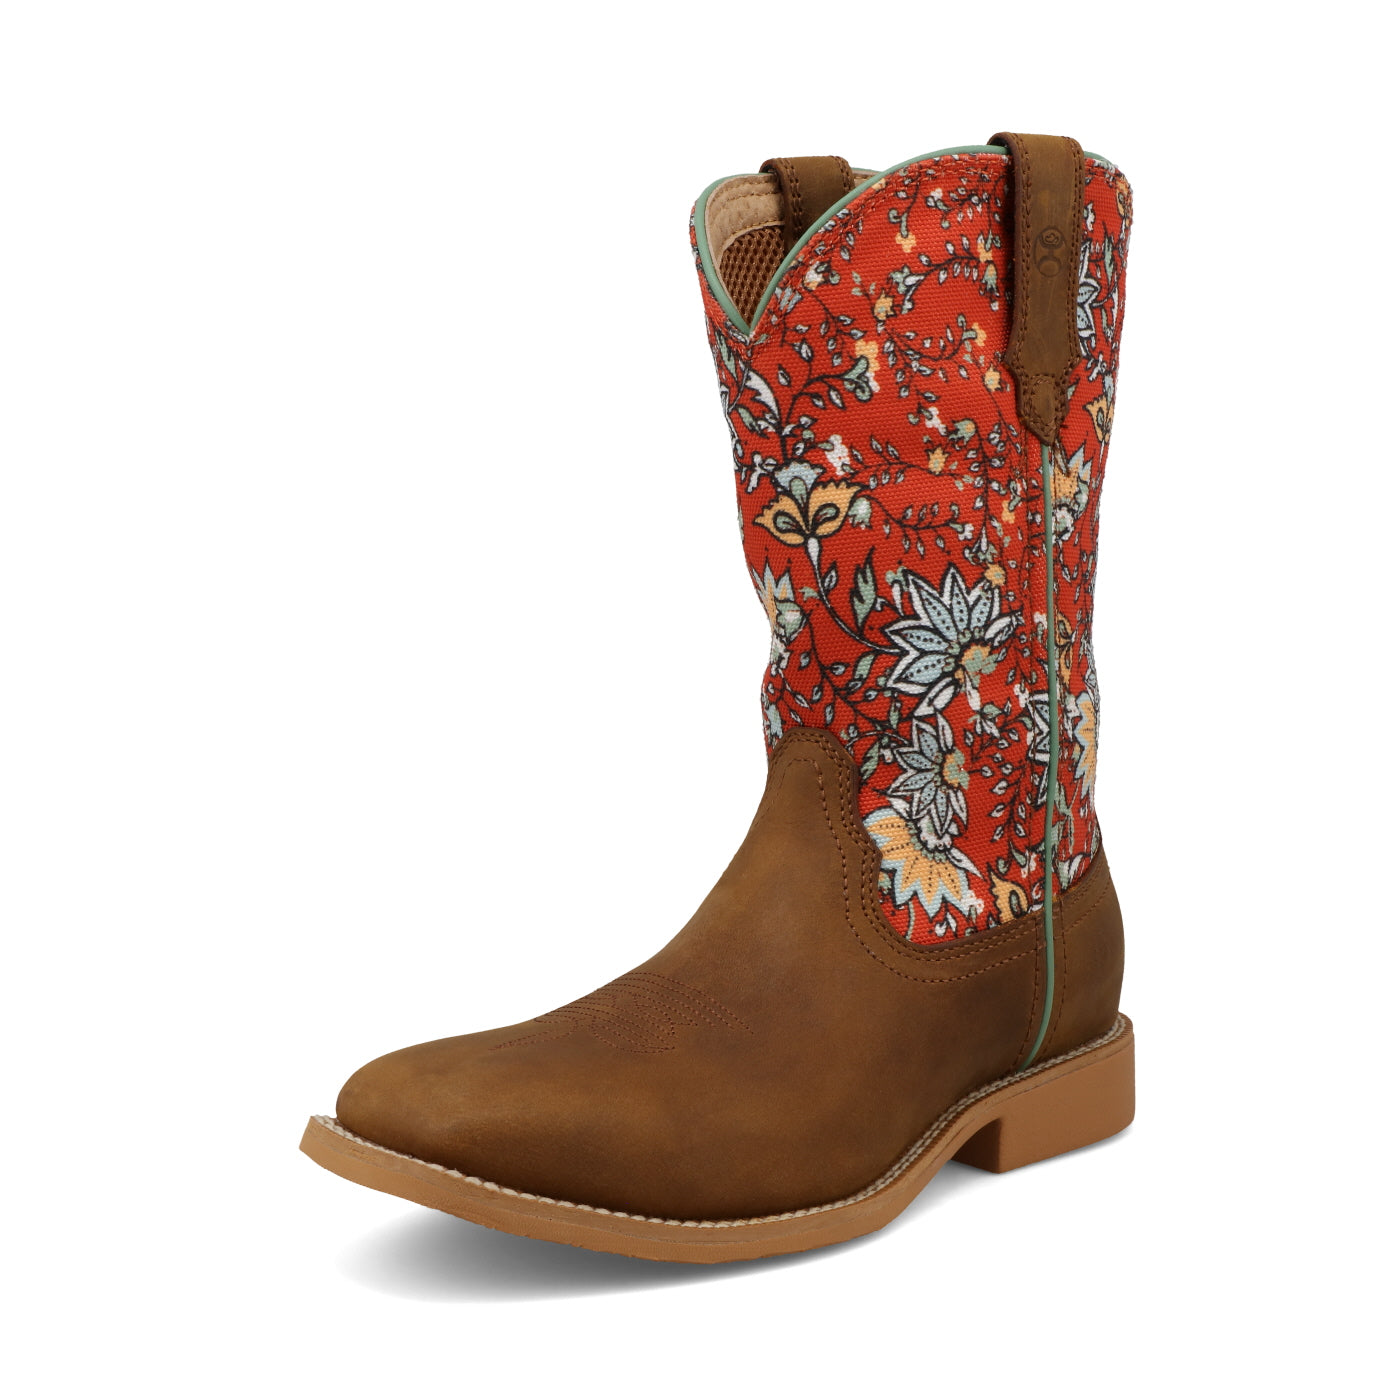 Youth Hooey Boot - Rustic Brown & Red Floral